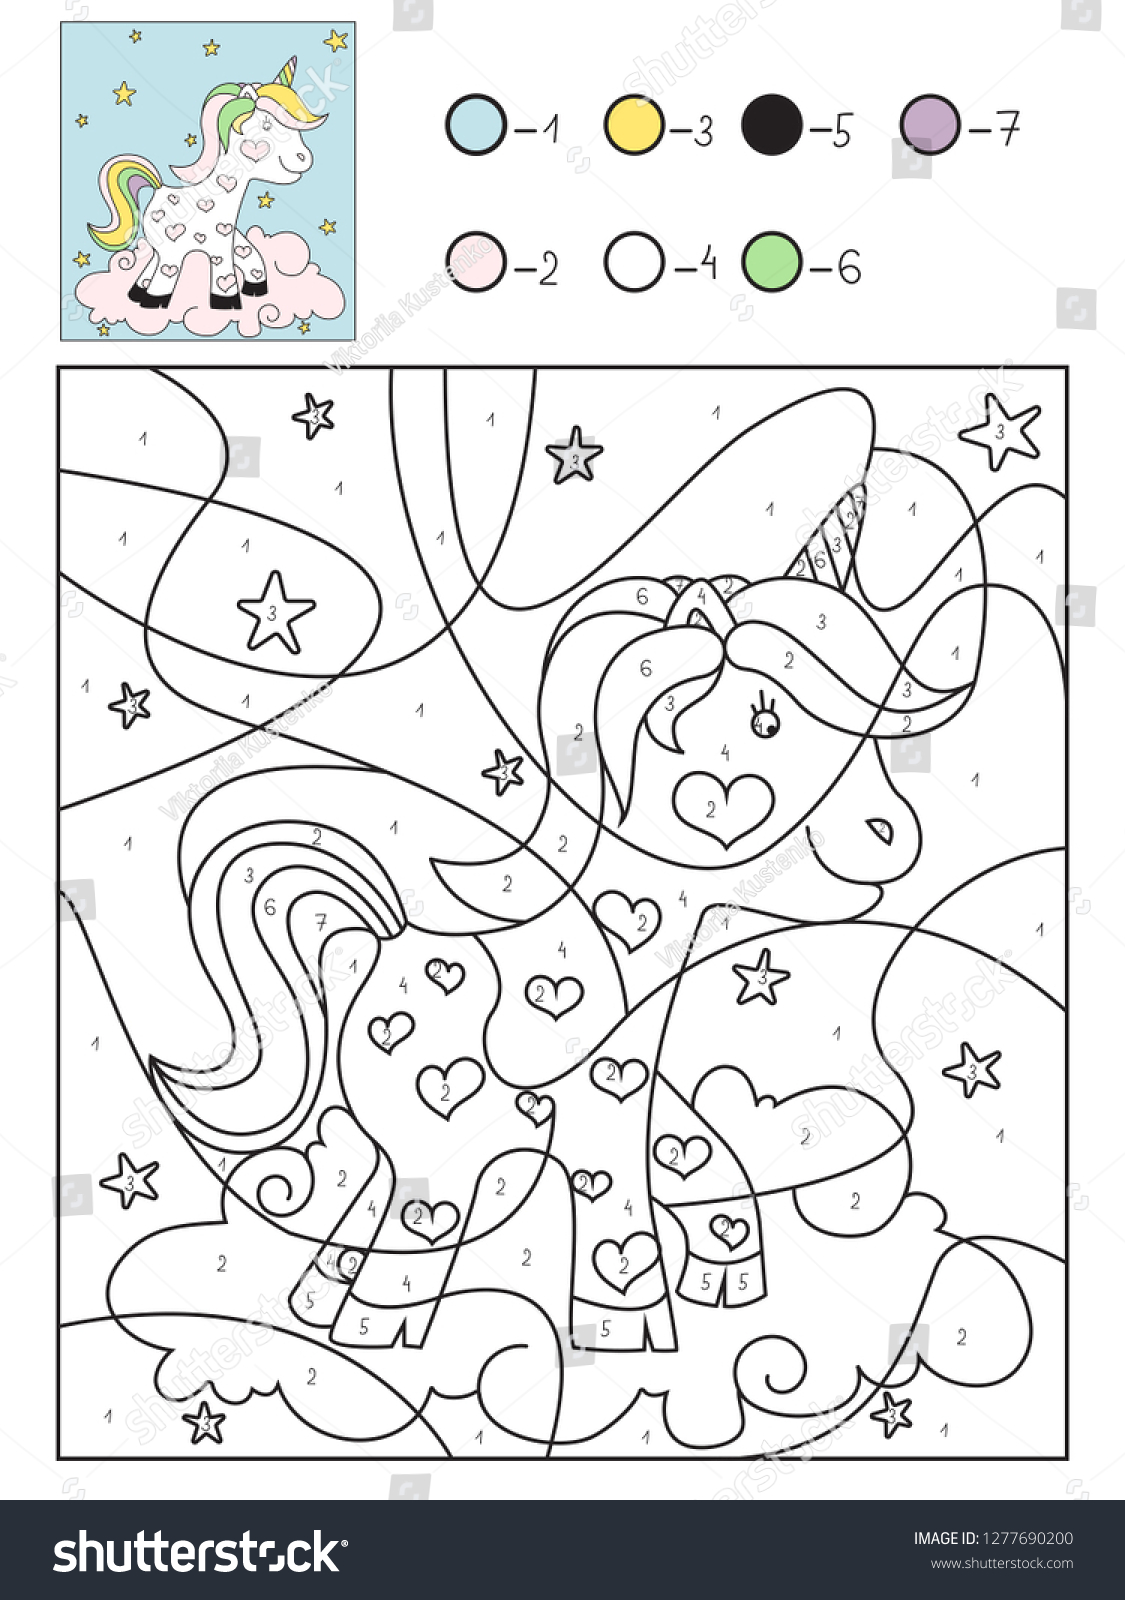 Cute Unicorn Vector Coloring Book By Stock Vector Royalty Free 1277690200